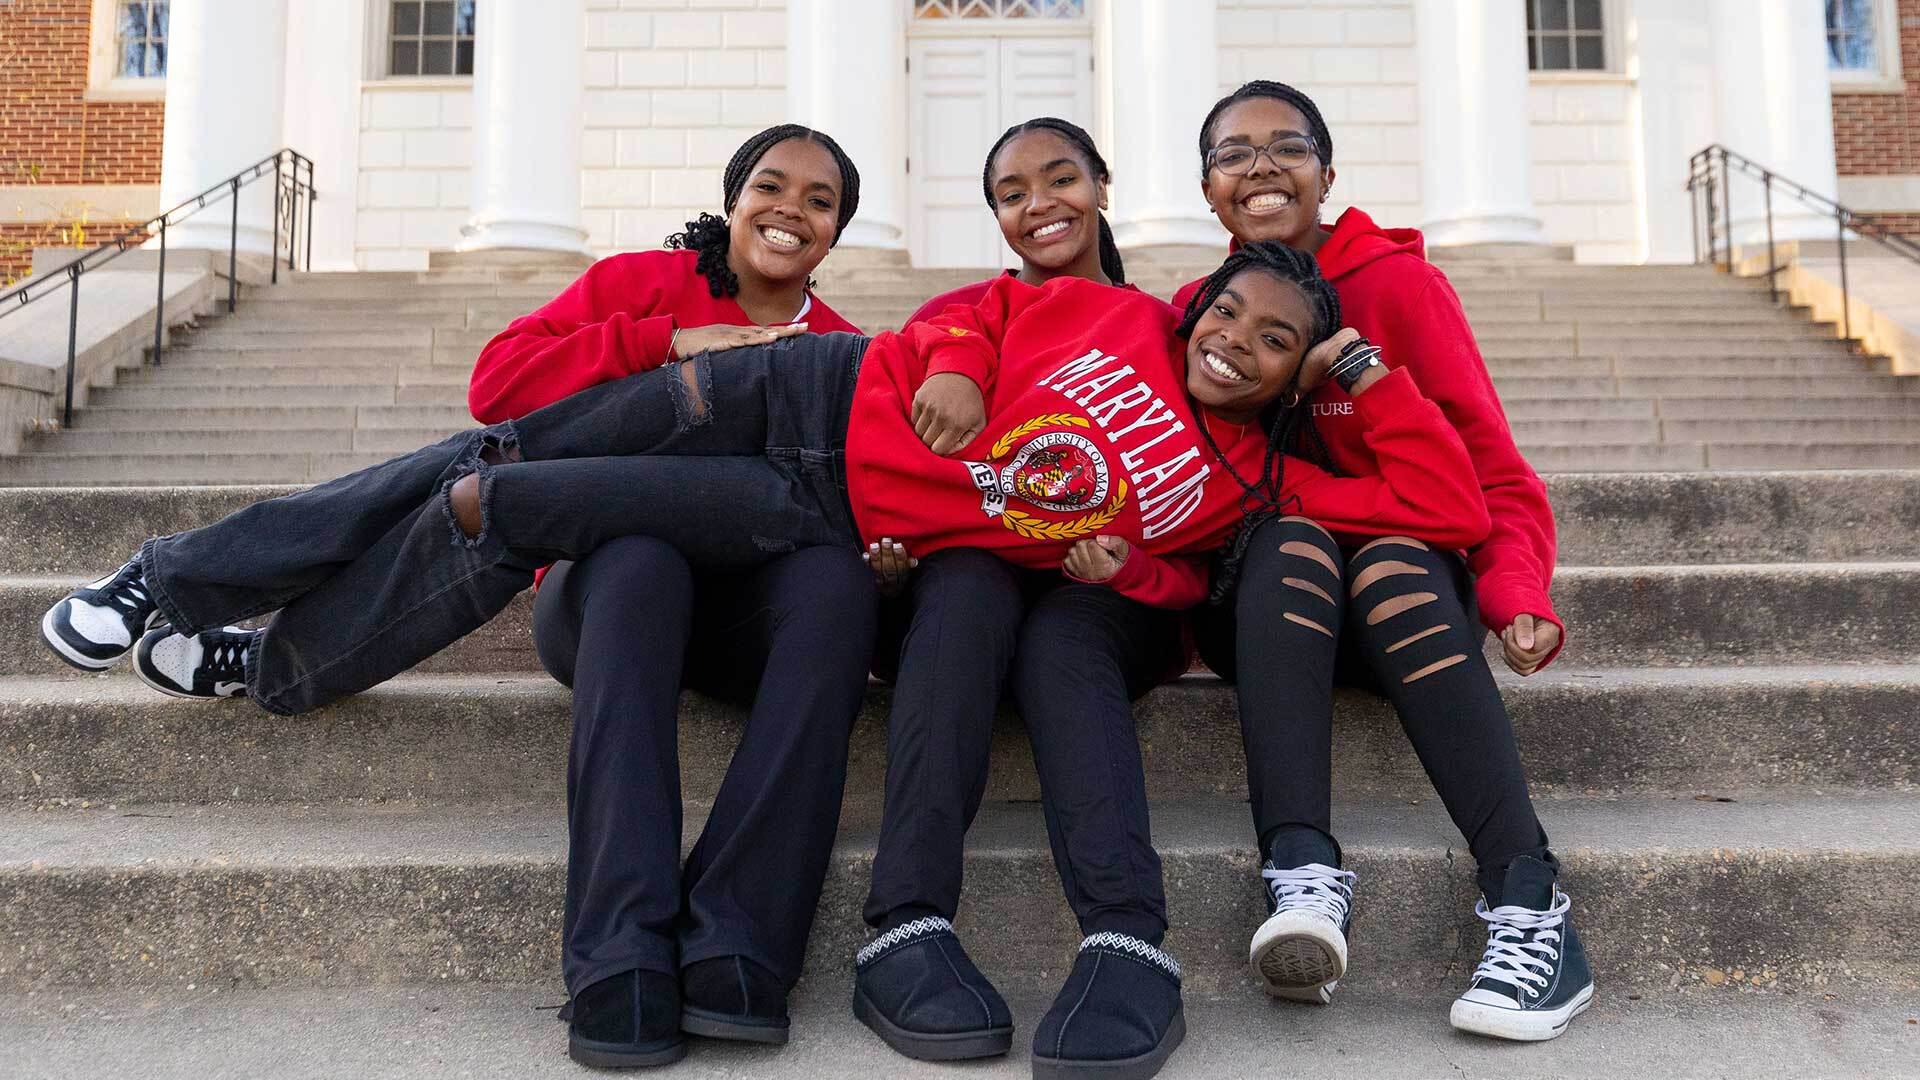 One Edwards sister lays across the other three sisters' laps, all wearing red Terps gear